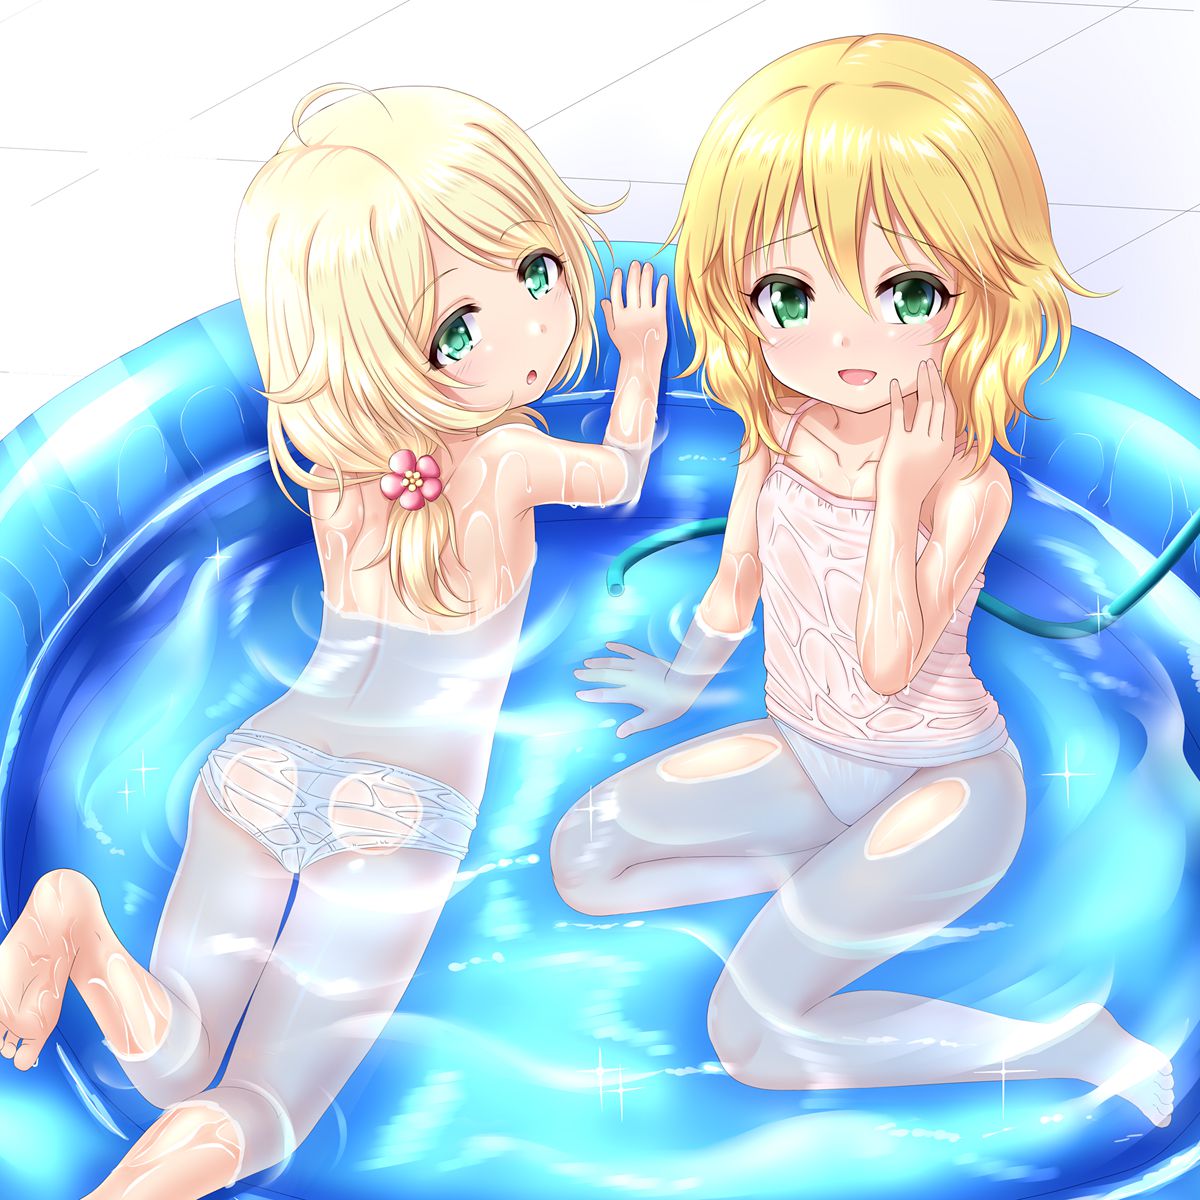 Erotic anime summary Erotic image collection of wet transparent beauties and beautiful girls that are variously transparent [50 sheets] 30